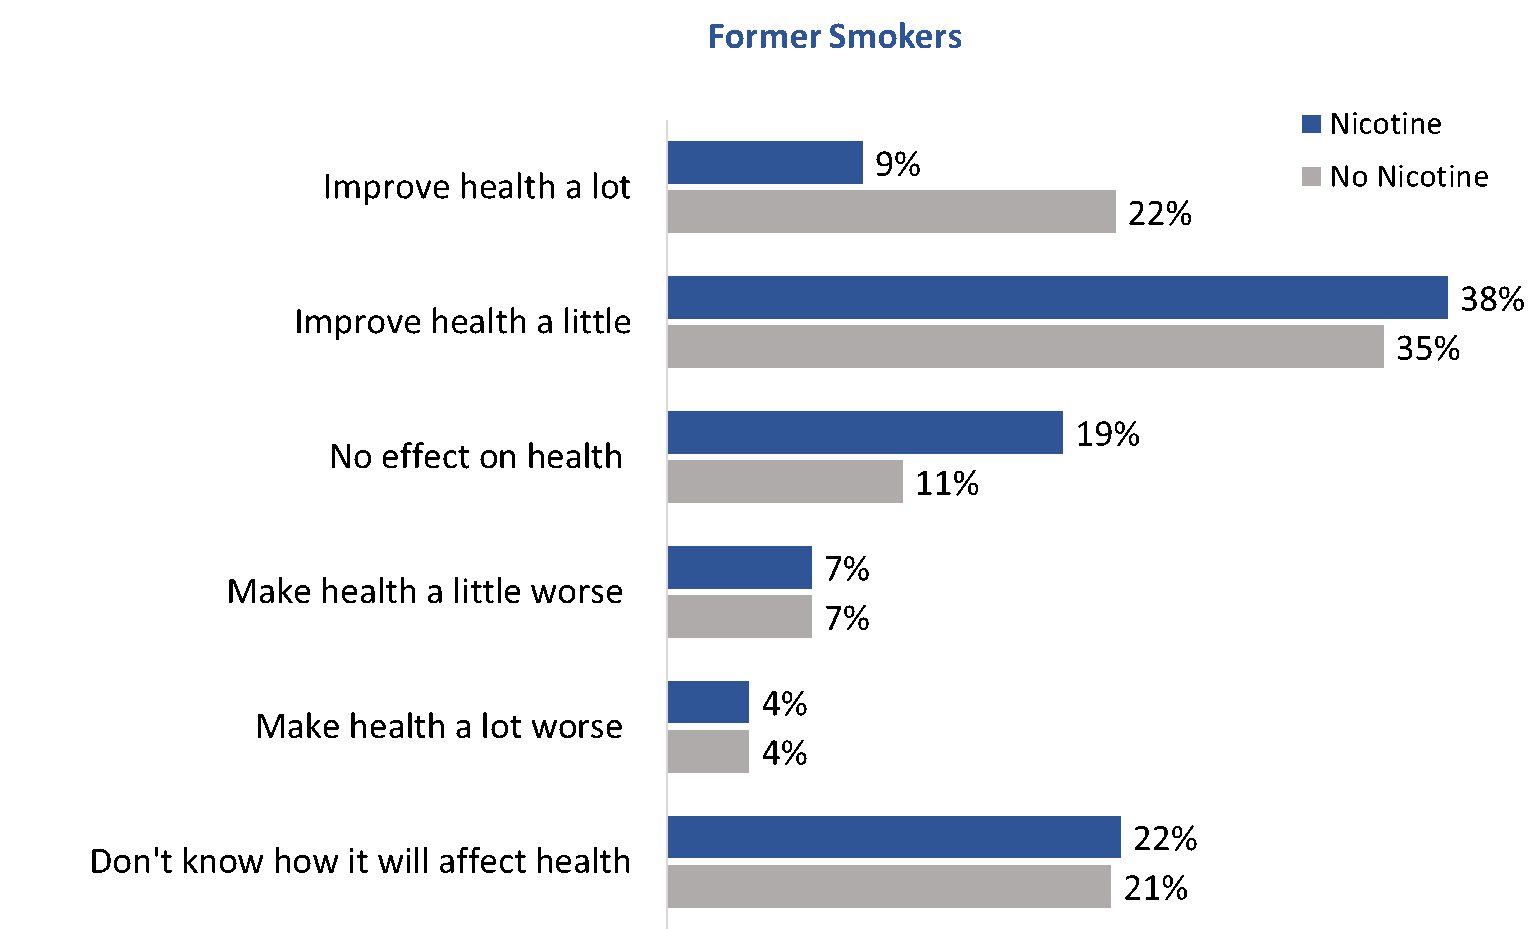 Figure 42: Switching to e-cigarettes and health [former smokers]